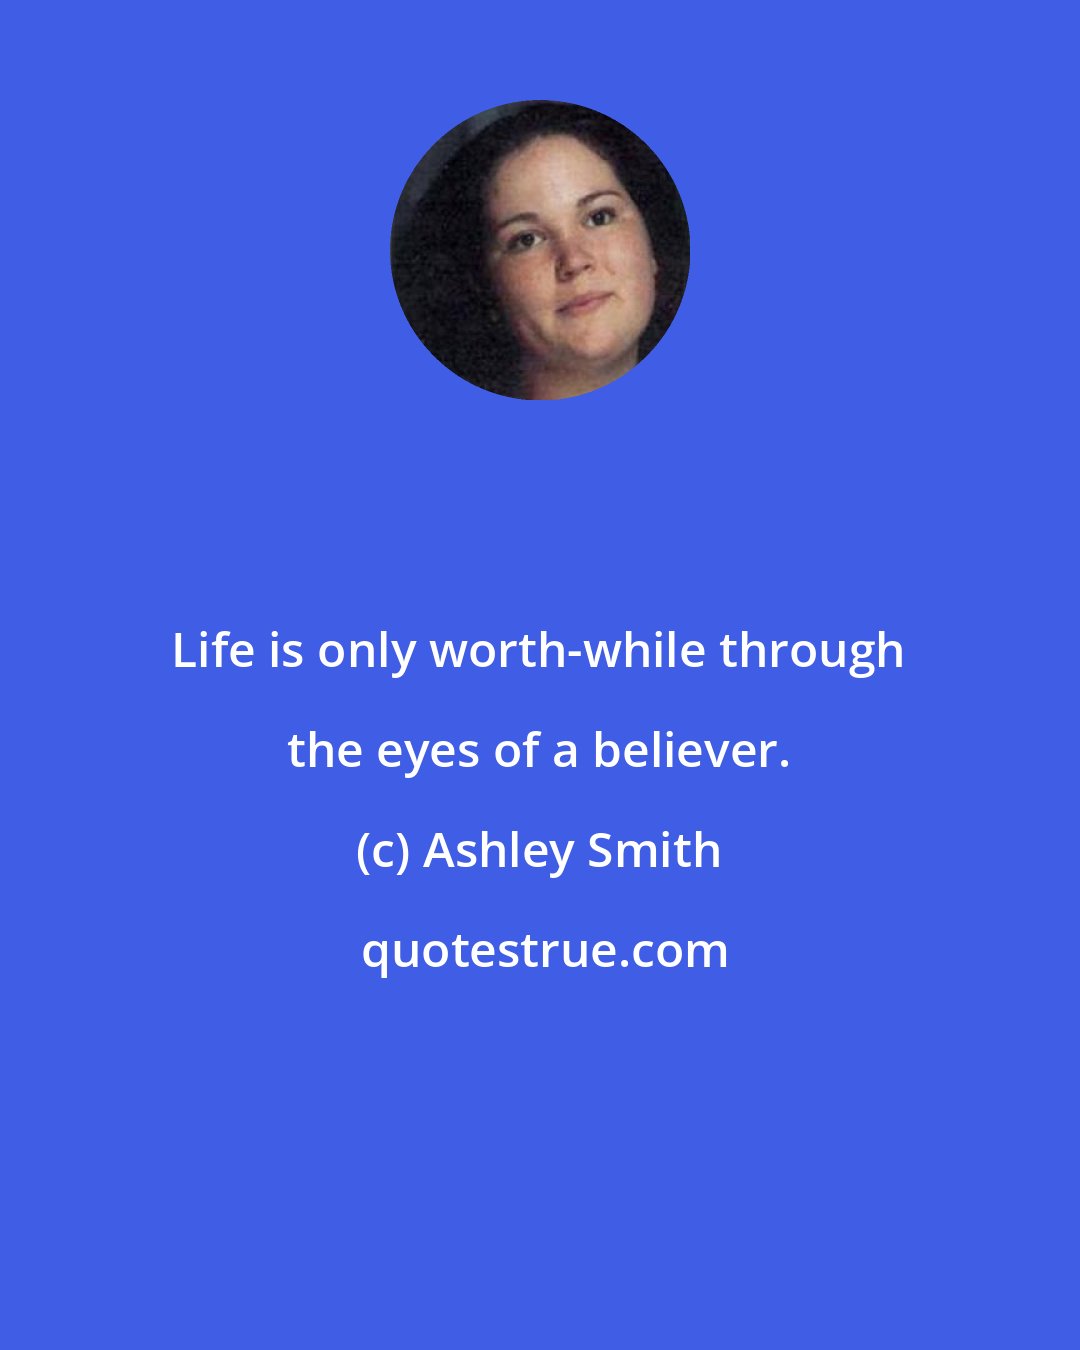 Ashley Smith: Life is only worth-while through the eyes of a believer.